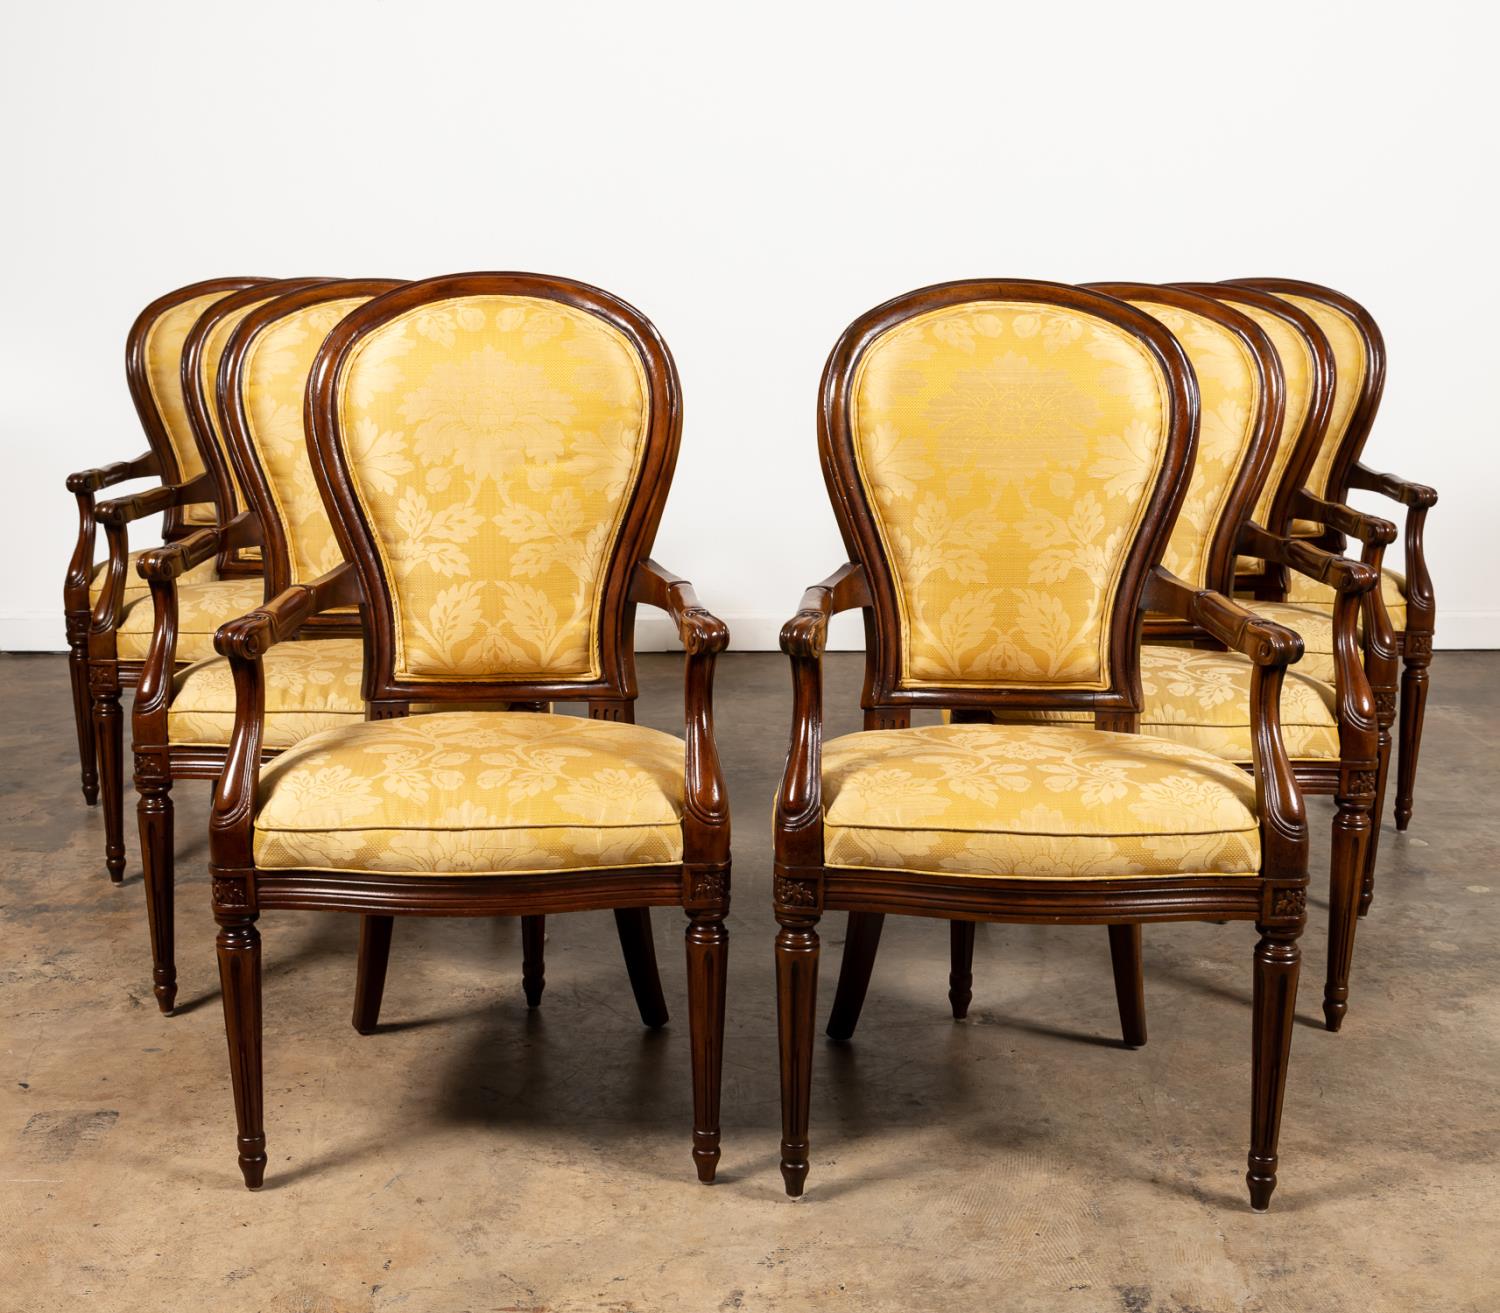 SET OF EIGHT LOUIS PHILIPPE-STYLE